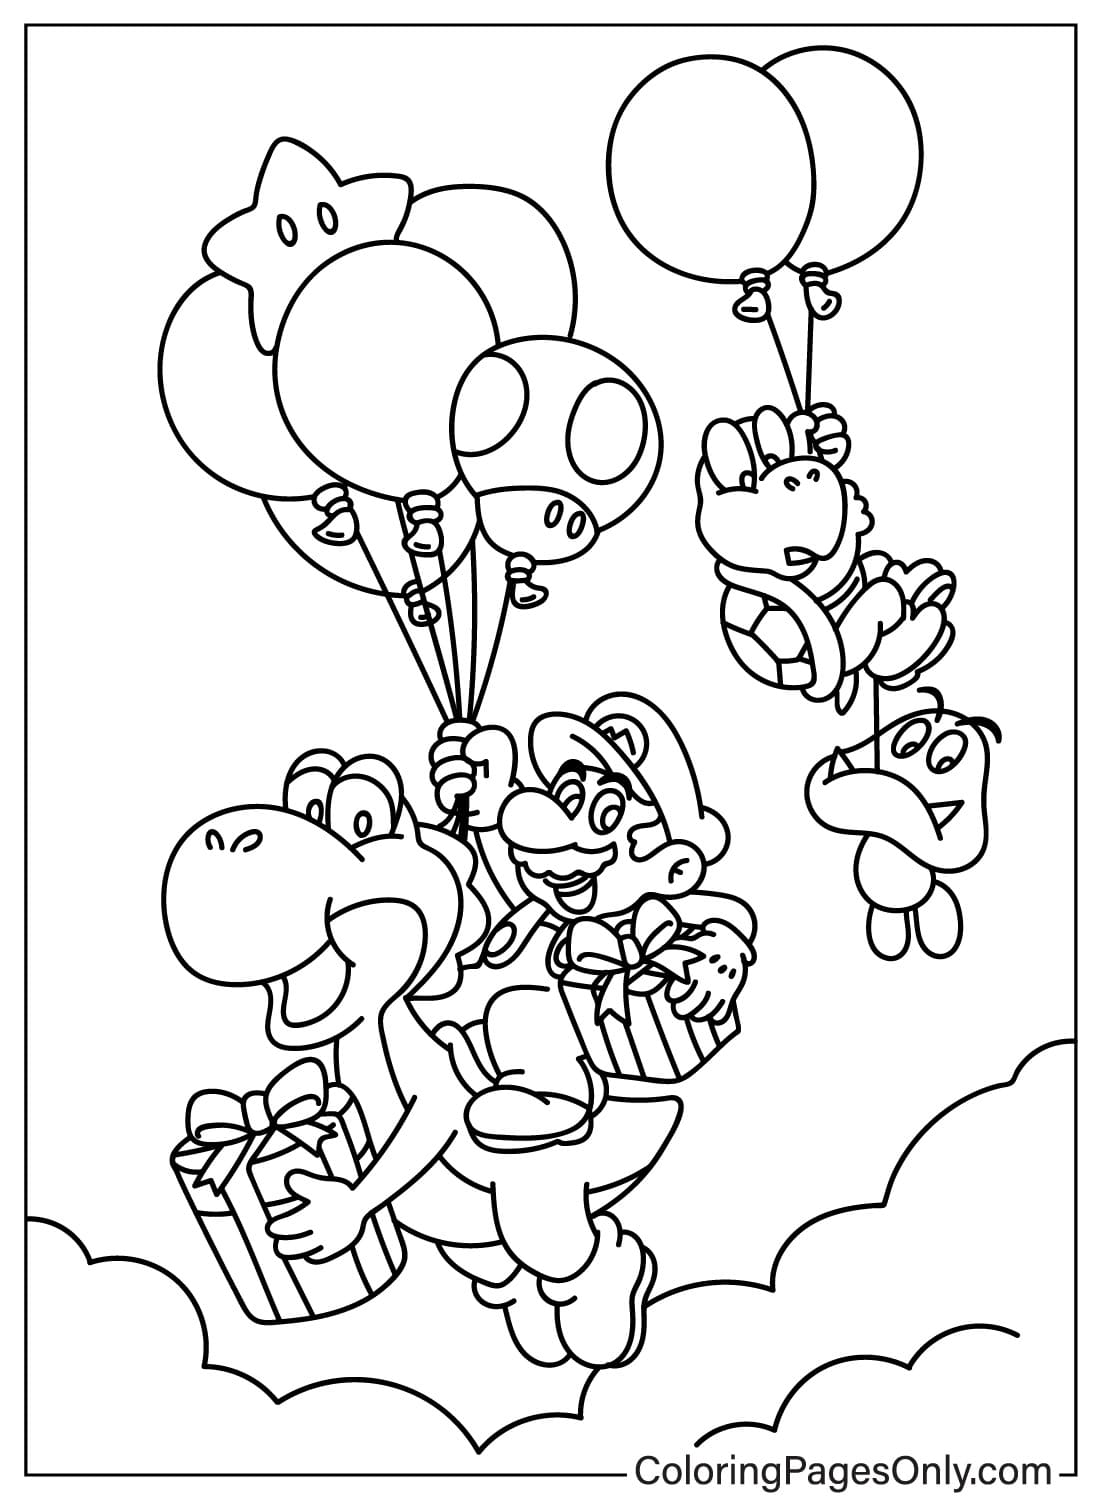 Koopa troopa coloring pages